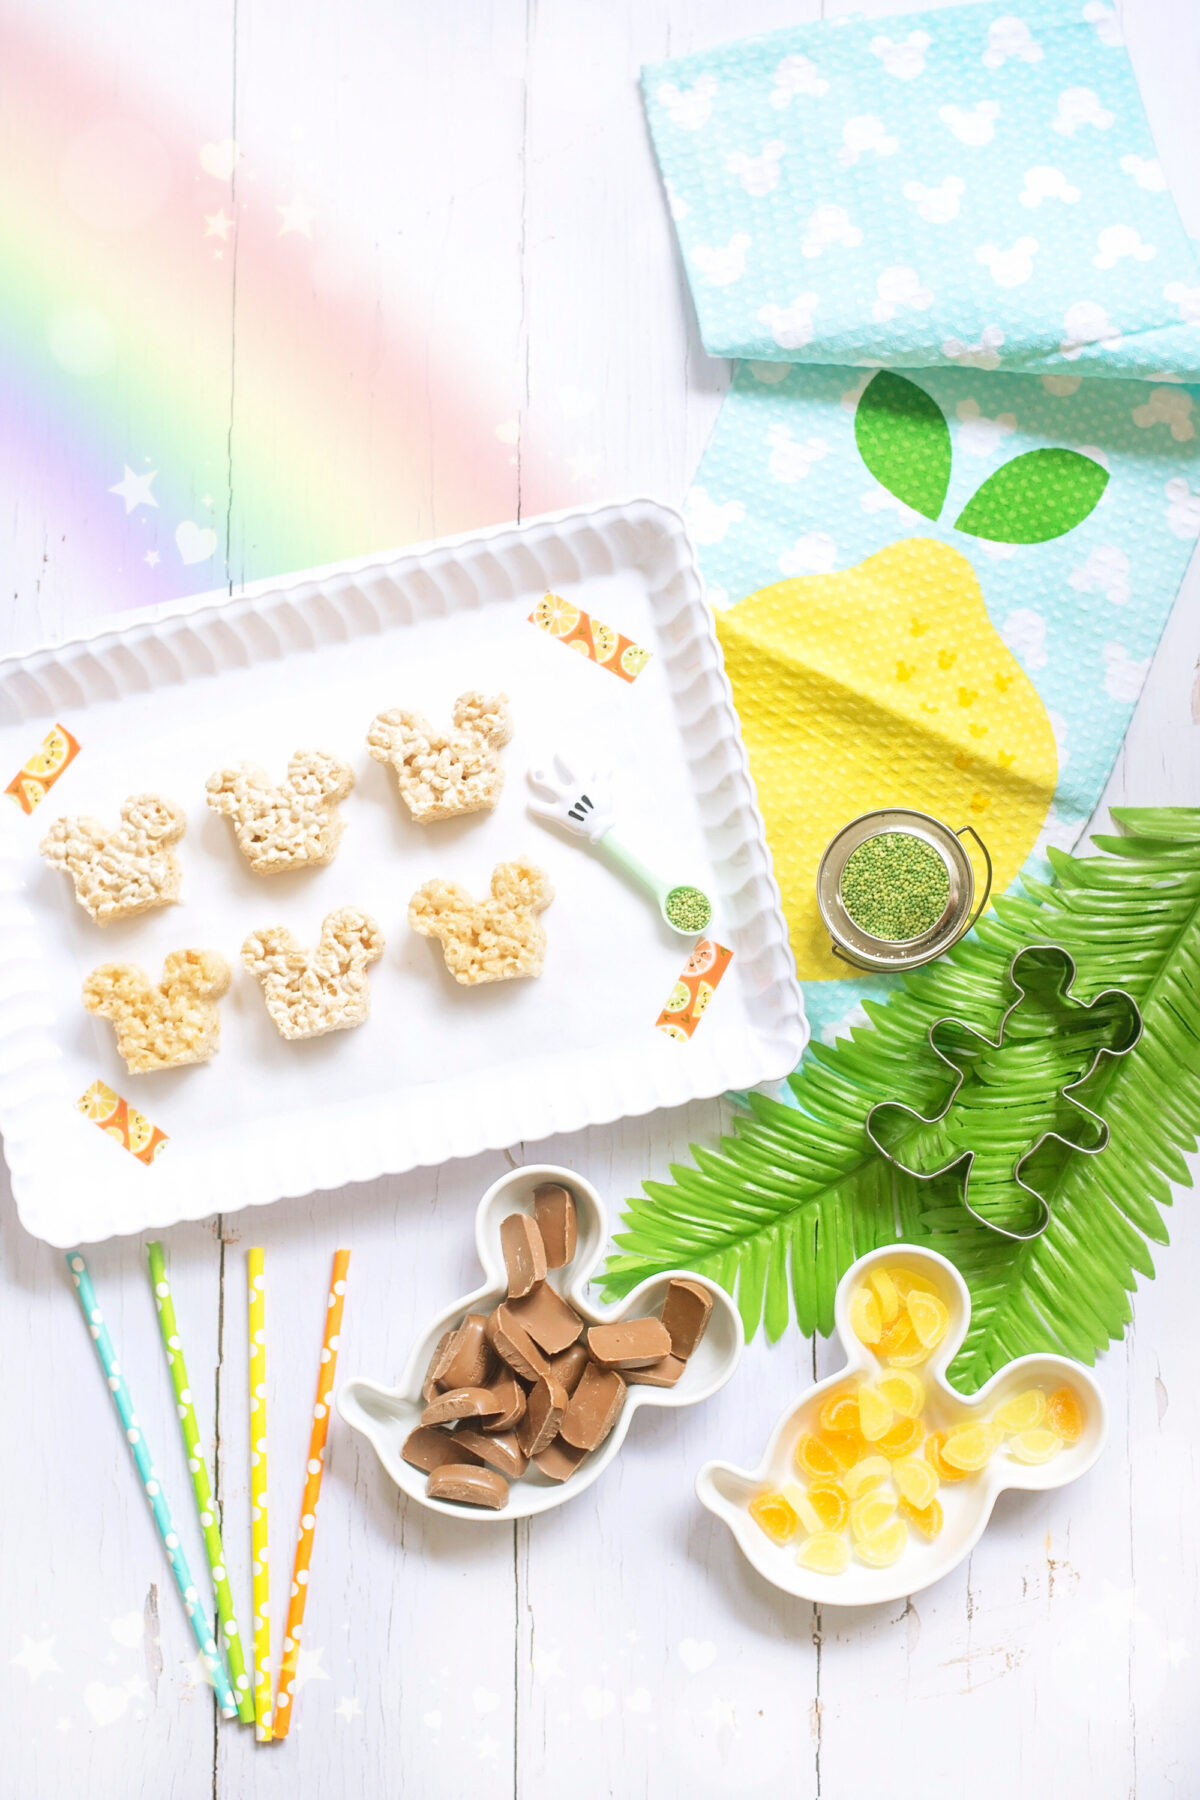 Image shows scalloped tray of summer themed Mickey Mouse Rice Krispie Treats surrounded by orange and lemon slices and tropical leaves, Disney tea towels and Minnie Mouse straws. All of the ingredients for the recipe are laid out on the tray including a DIsney's Mickey Mouse cookie cutter.